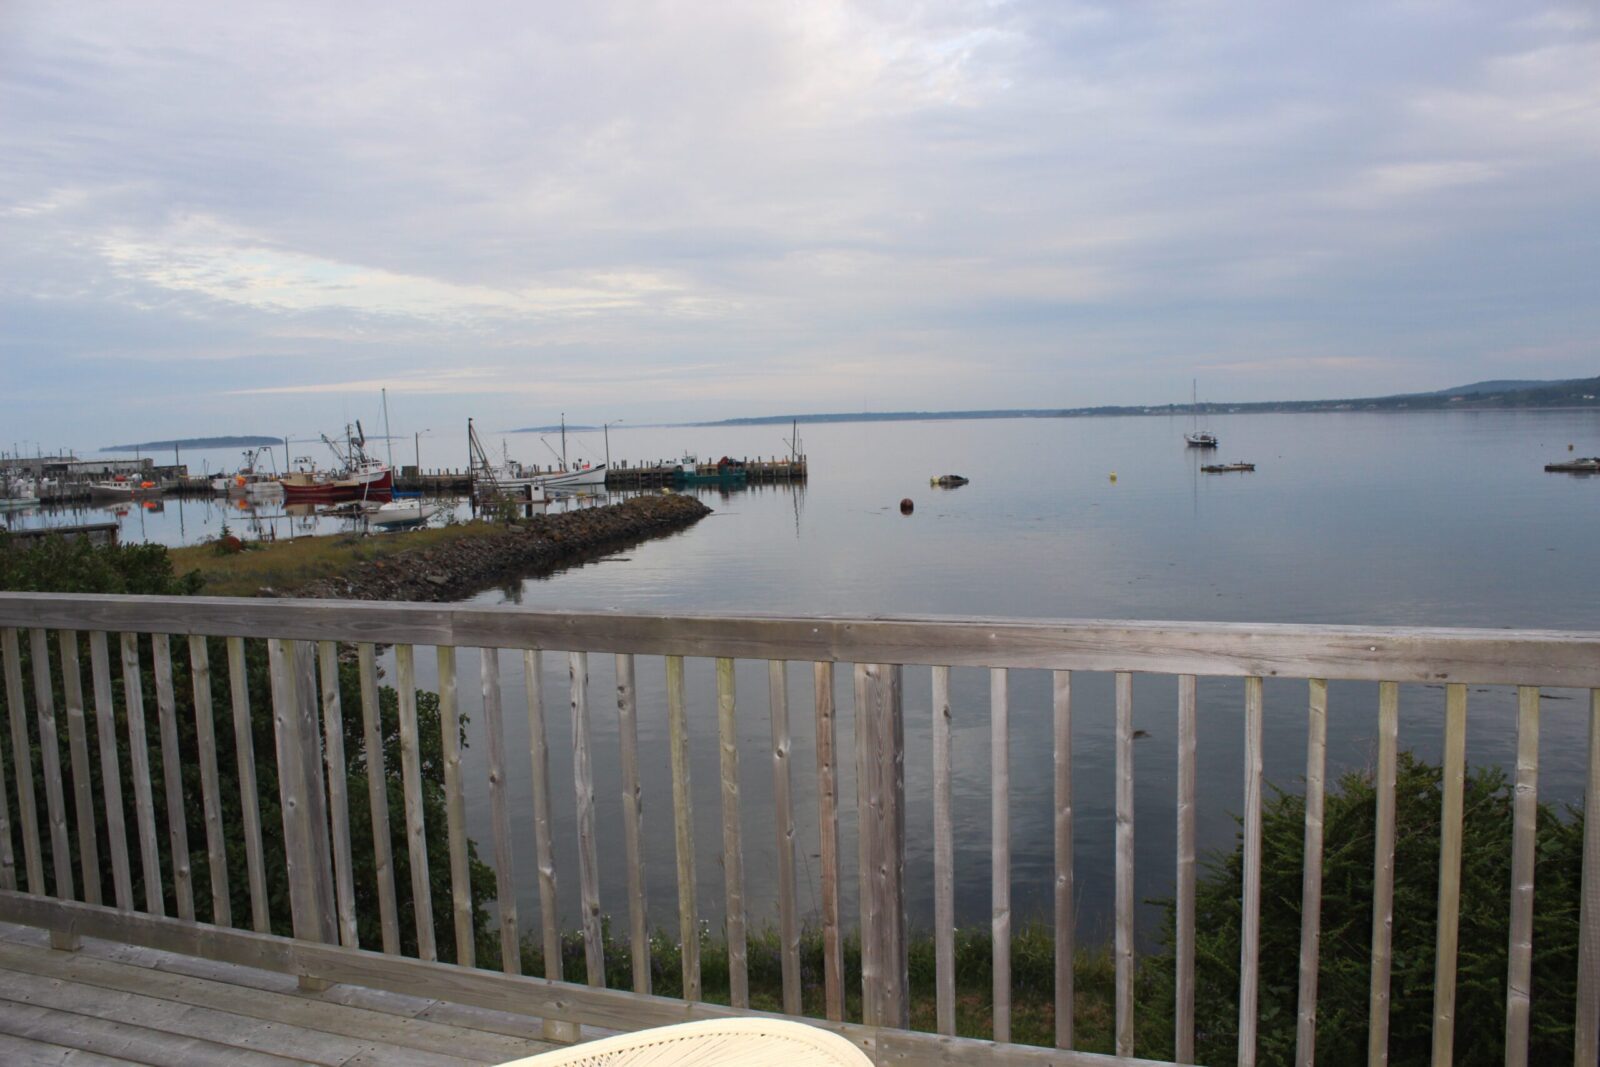 A view of a harbor from a deck.